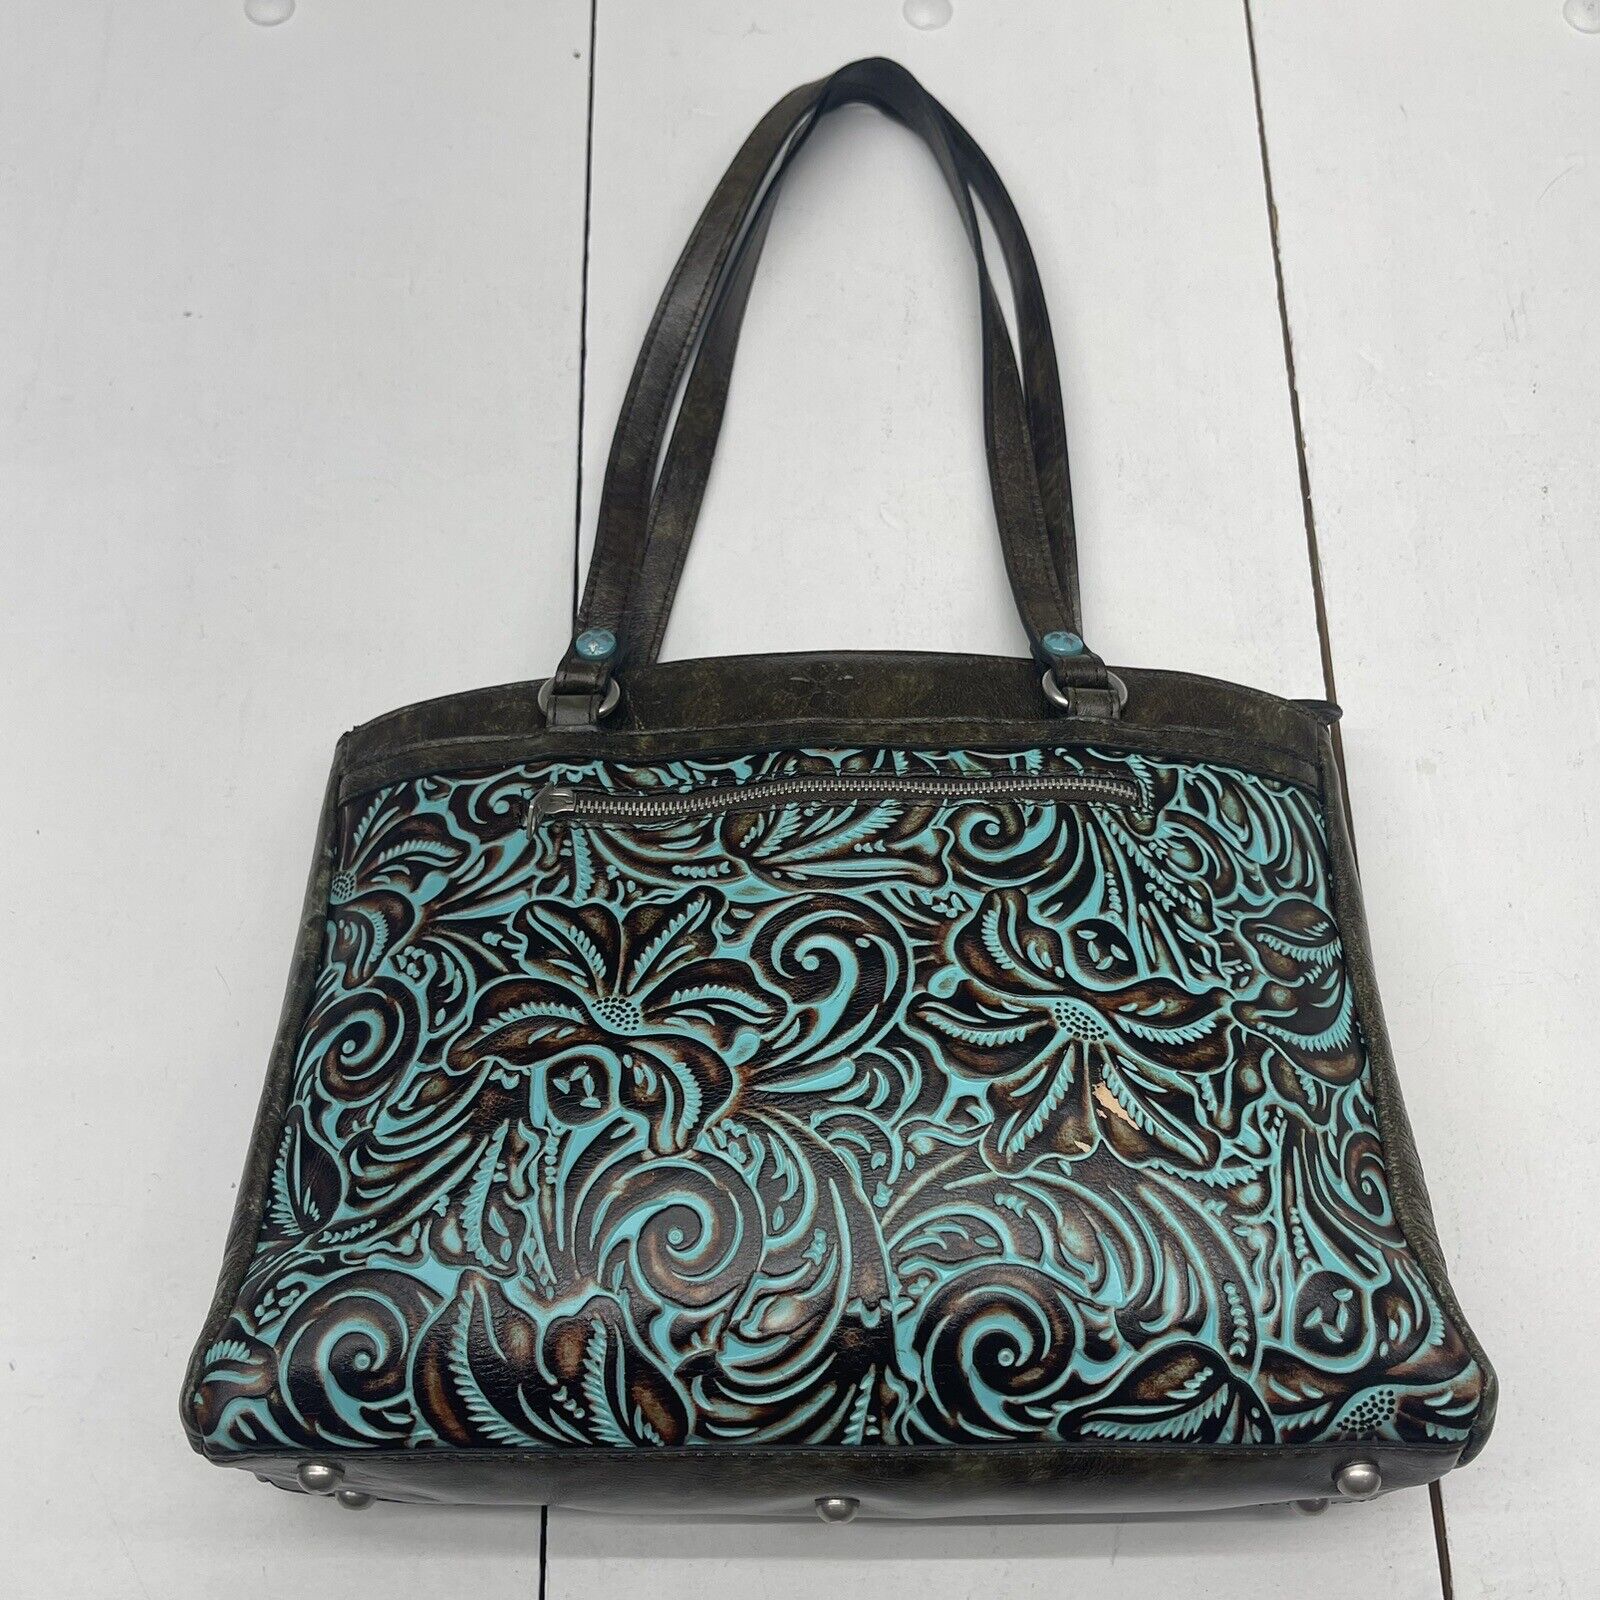 Found this absolutely stunning Patricia Nash purse in the consignment store  : r/handbags